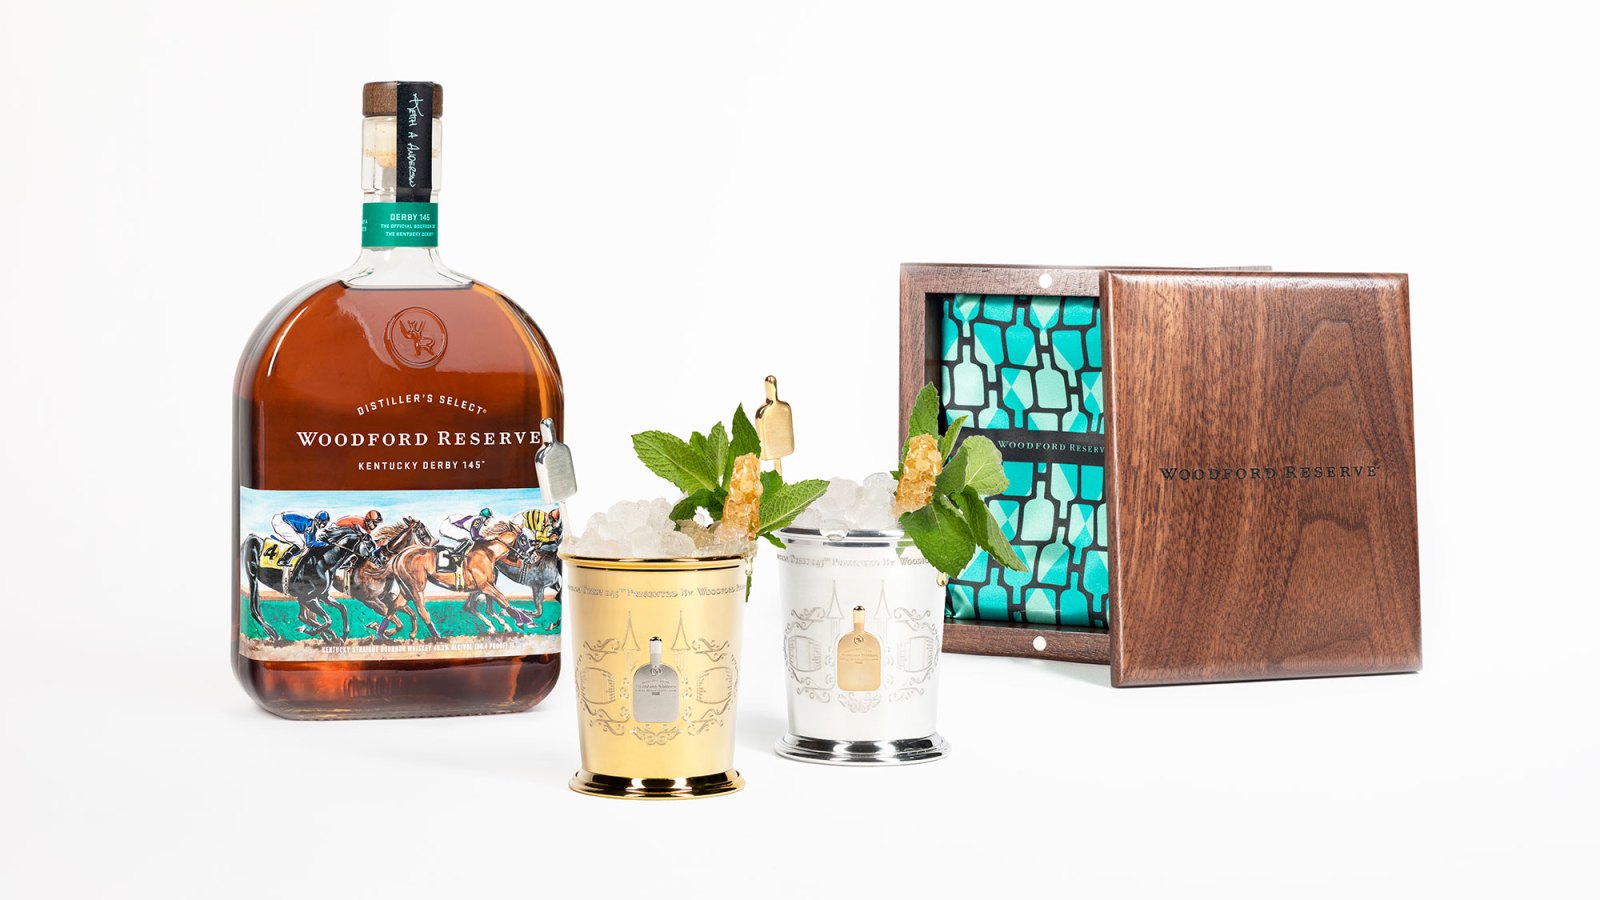 Woodford Tea Punch Is Perfect Kentucky Derby Cocktail: Get the Recipe